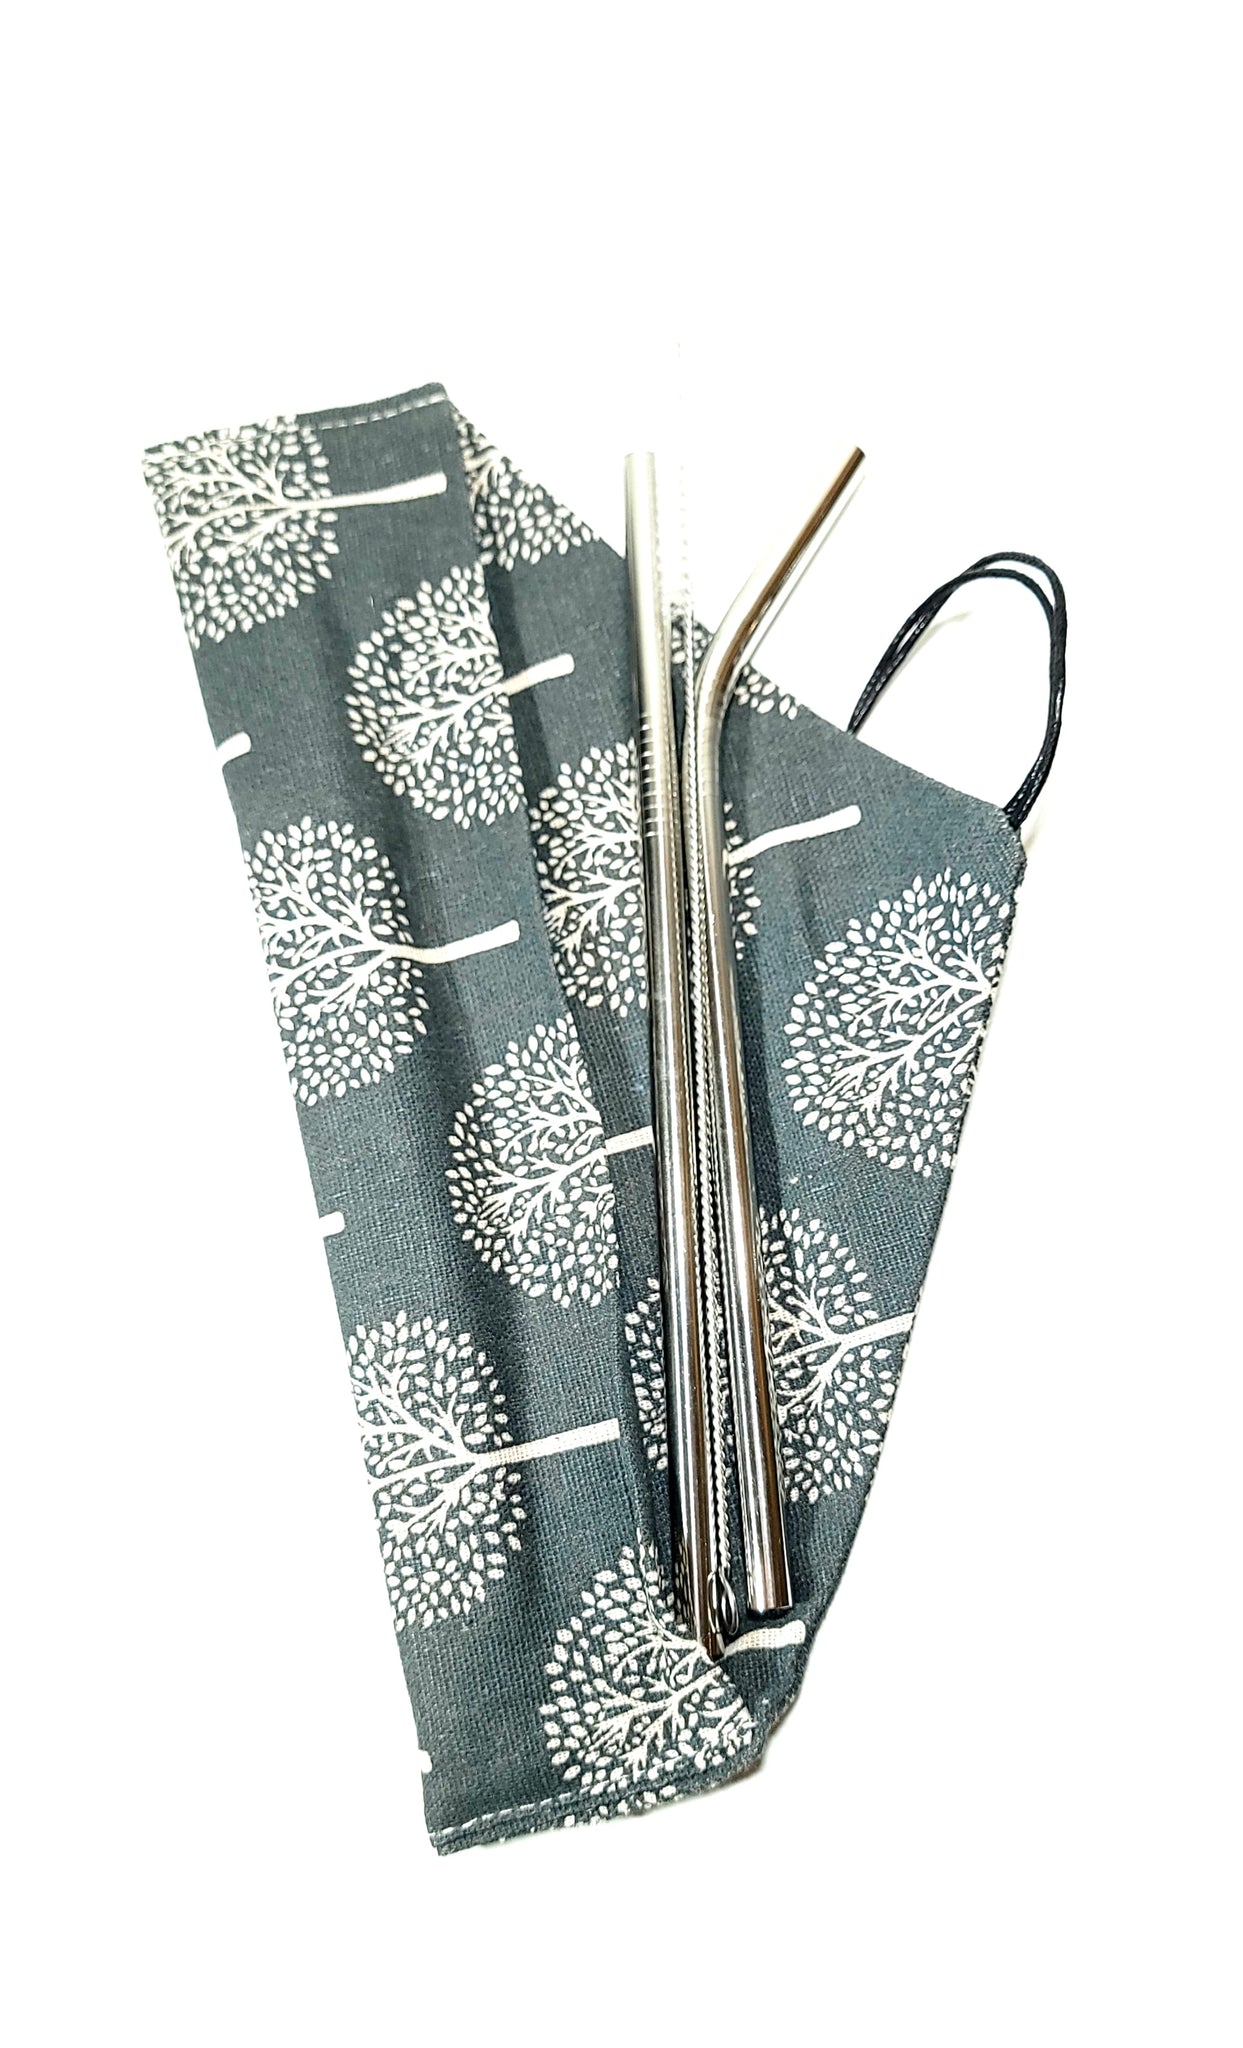 3 pack straw pack - 2 medium width stainless steel straws and straw cleaning brush in blue wrap bag with white trees on it.